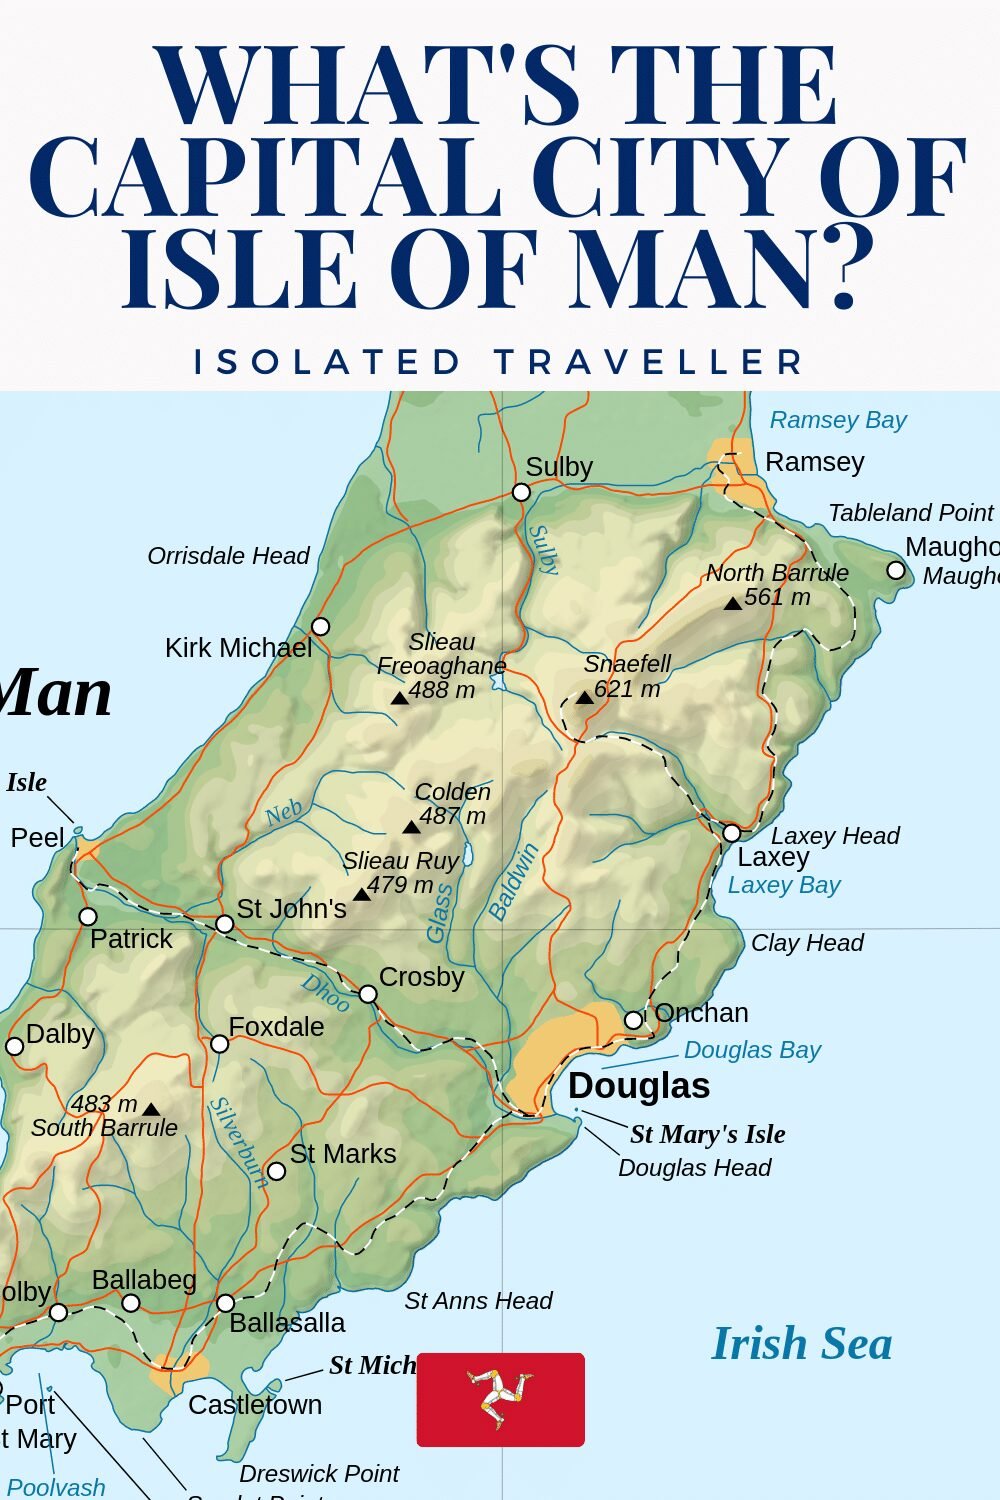 What's the Capital City of Isle of Man